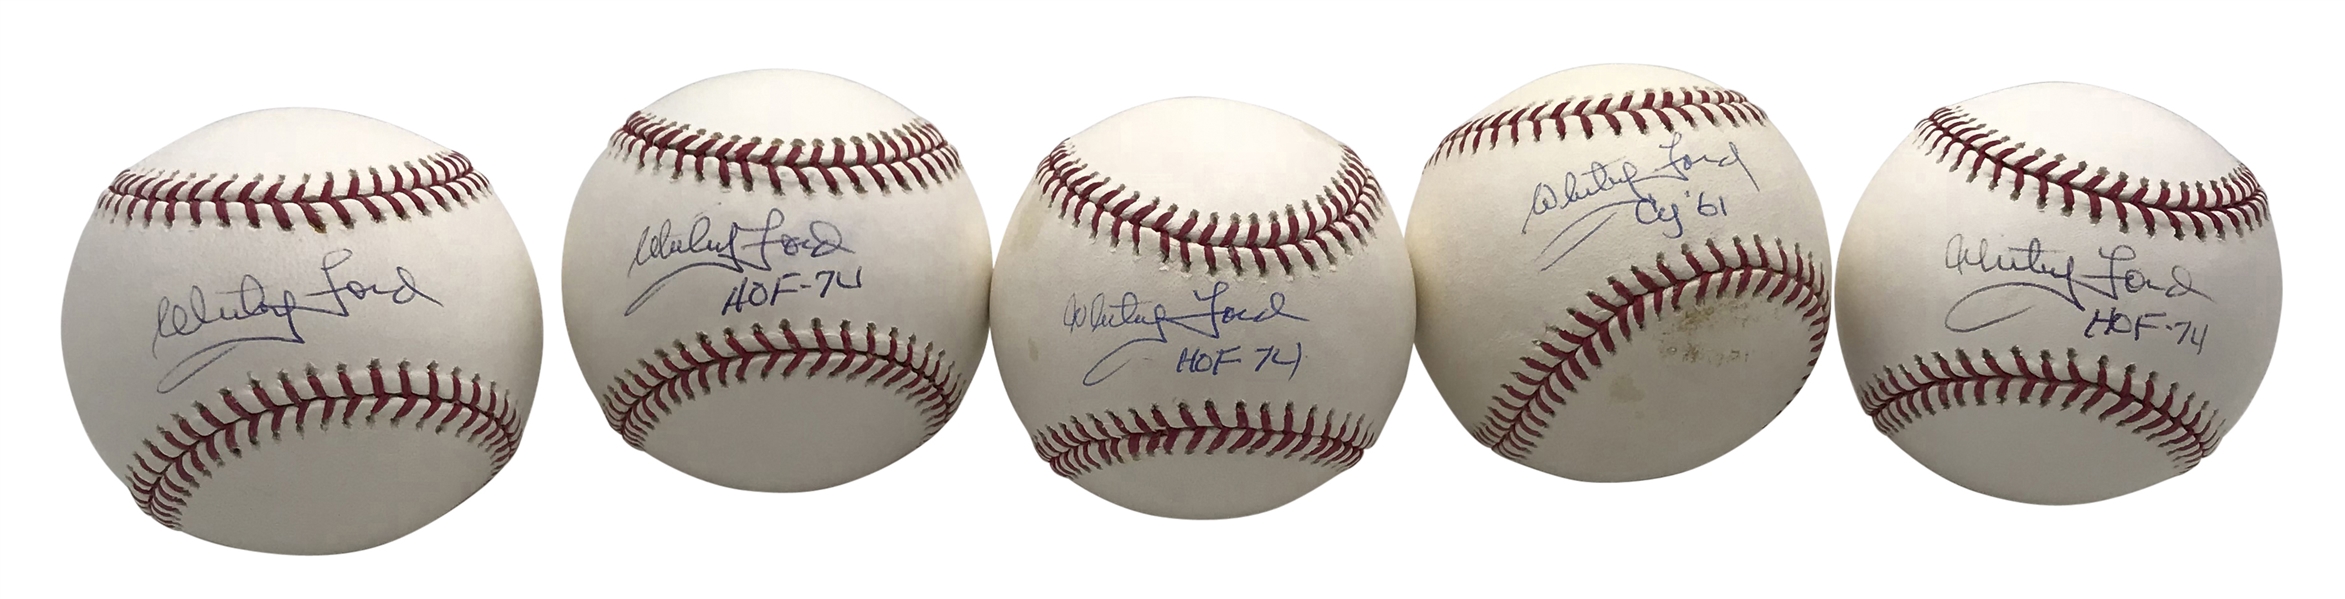 Lot of Five (5) Whitey Ford Signed Baseballs, Most w/ Inscriptions! (PSA/DNA)